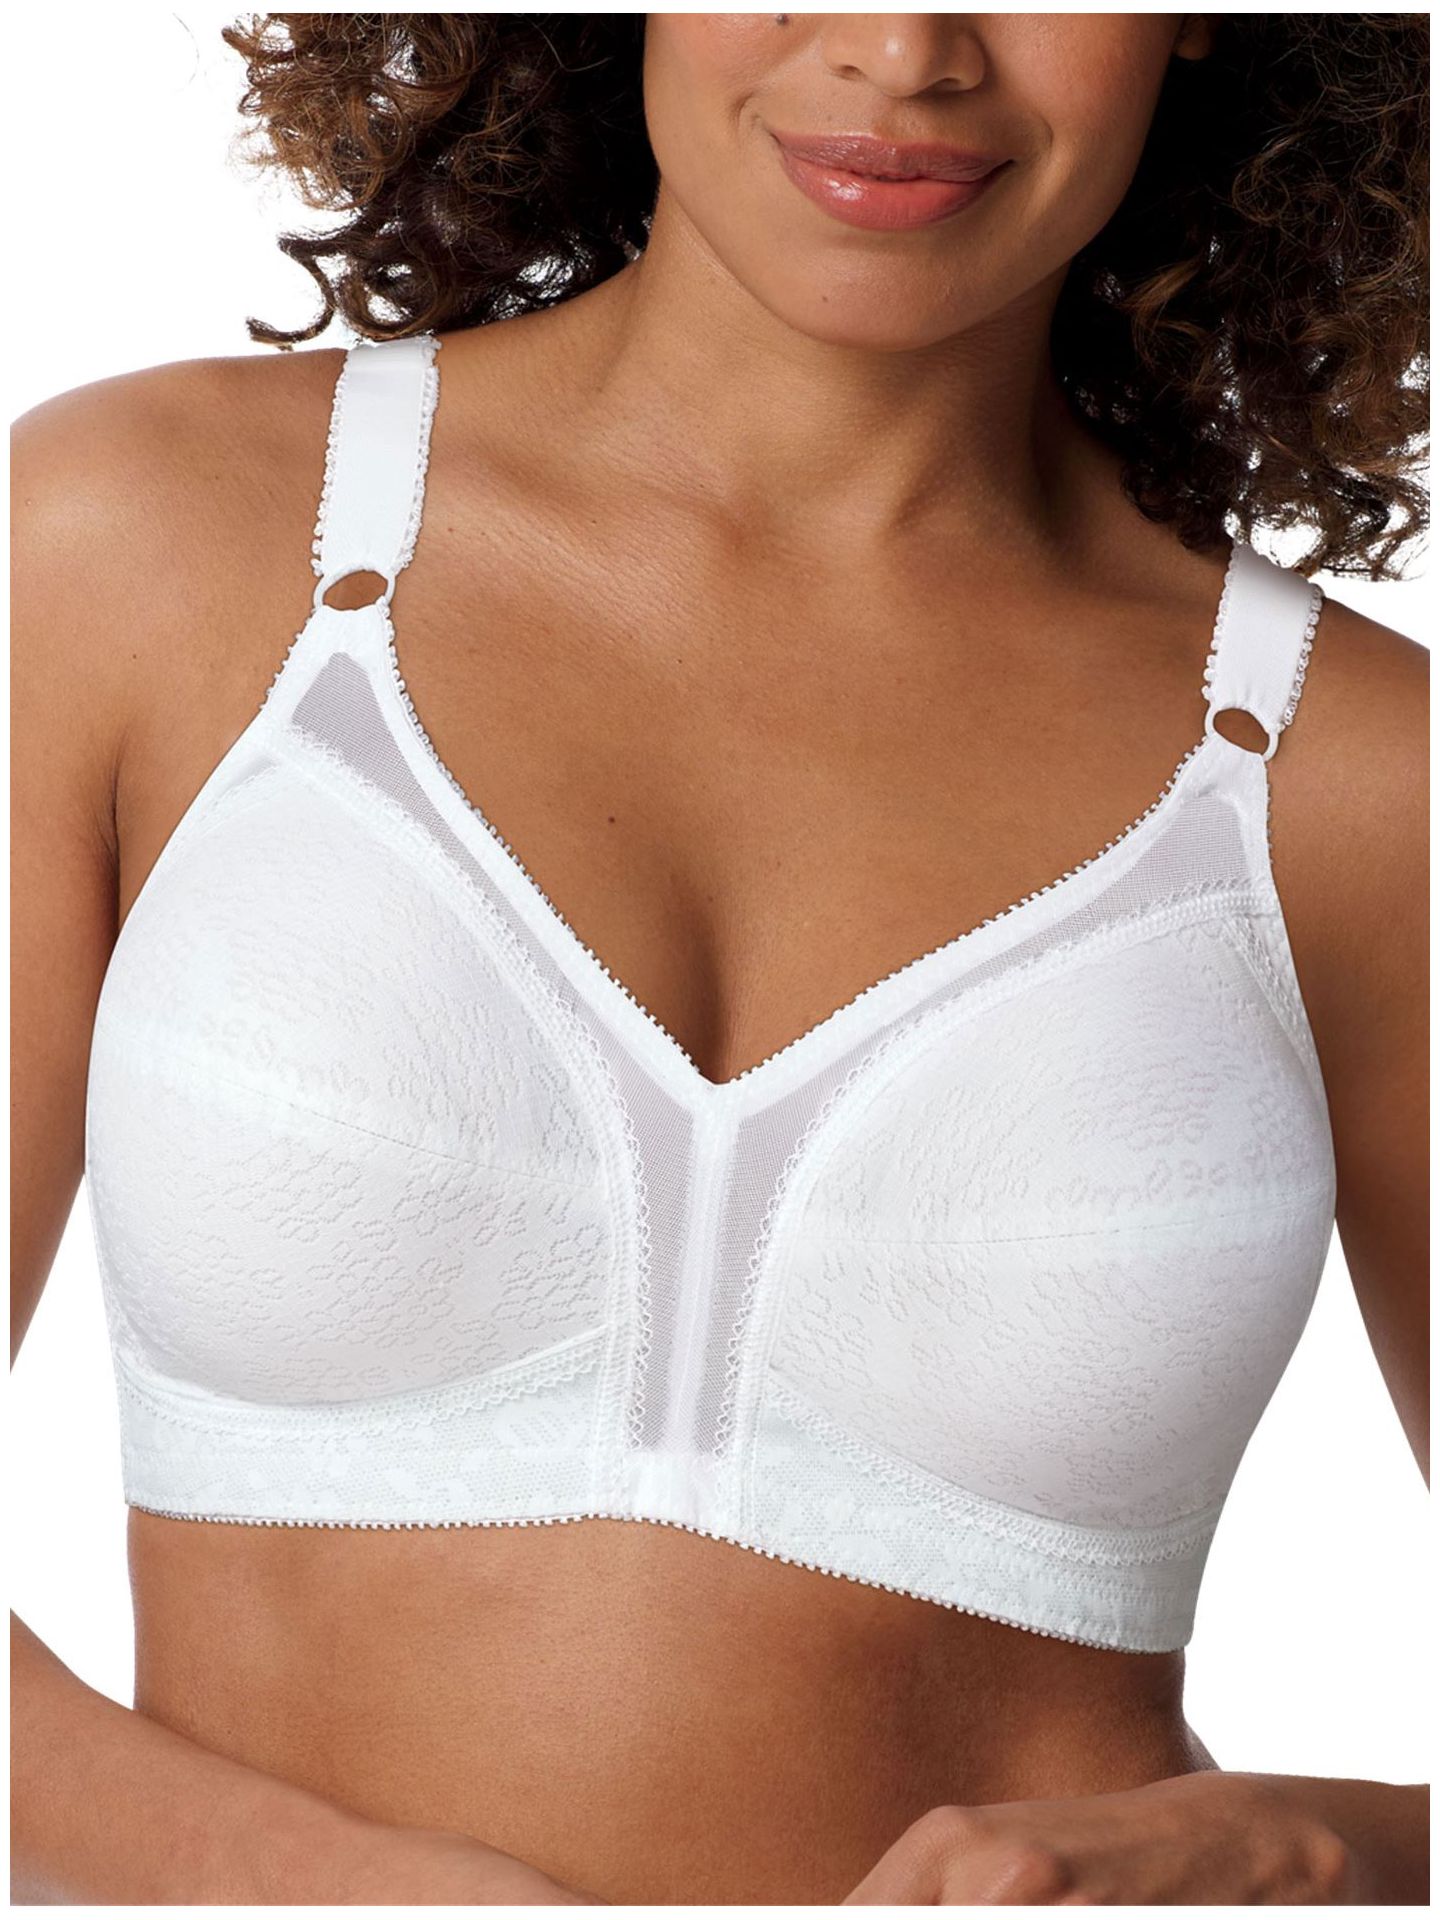 Bra 18 Hour Solid White Playtex Wire Size 36b 36 B Pointed Bullet for sale  online